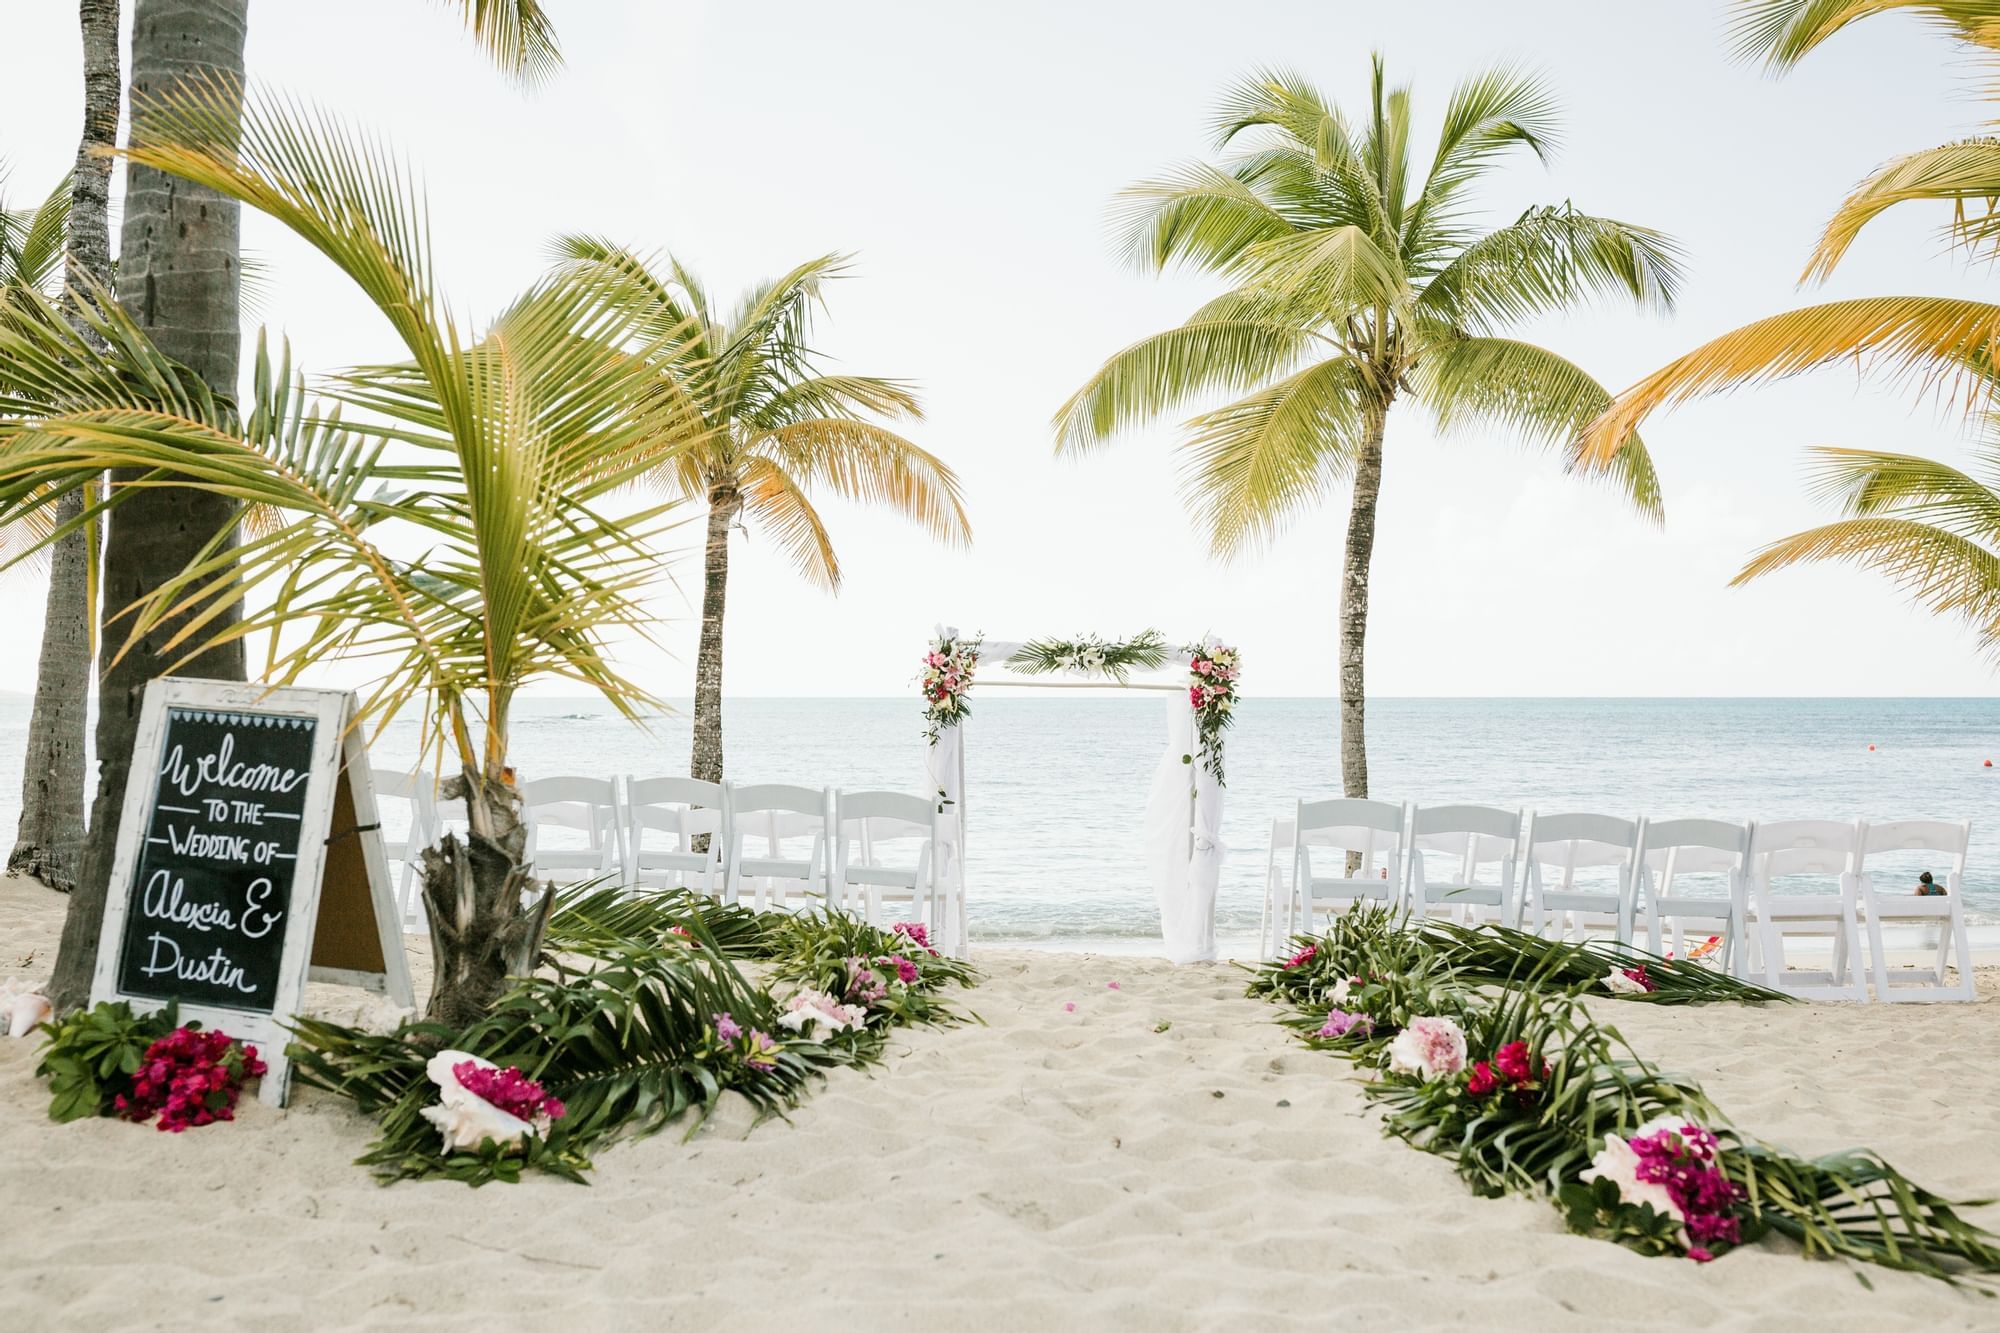 Wedding aisle decors at the beach in The Buccaneer Hotel